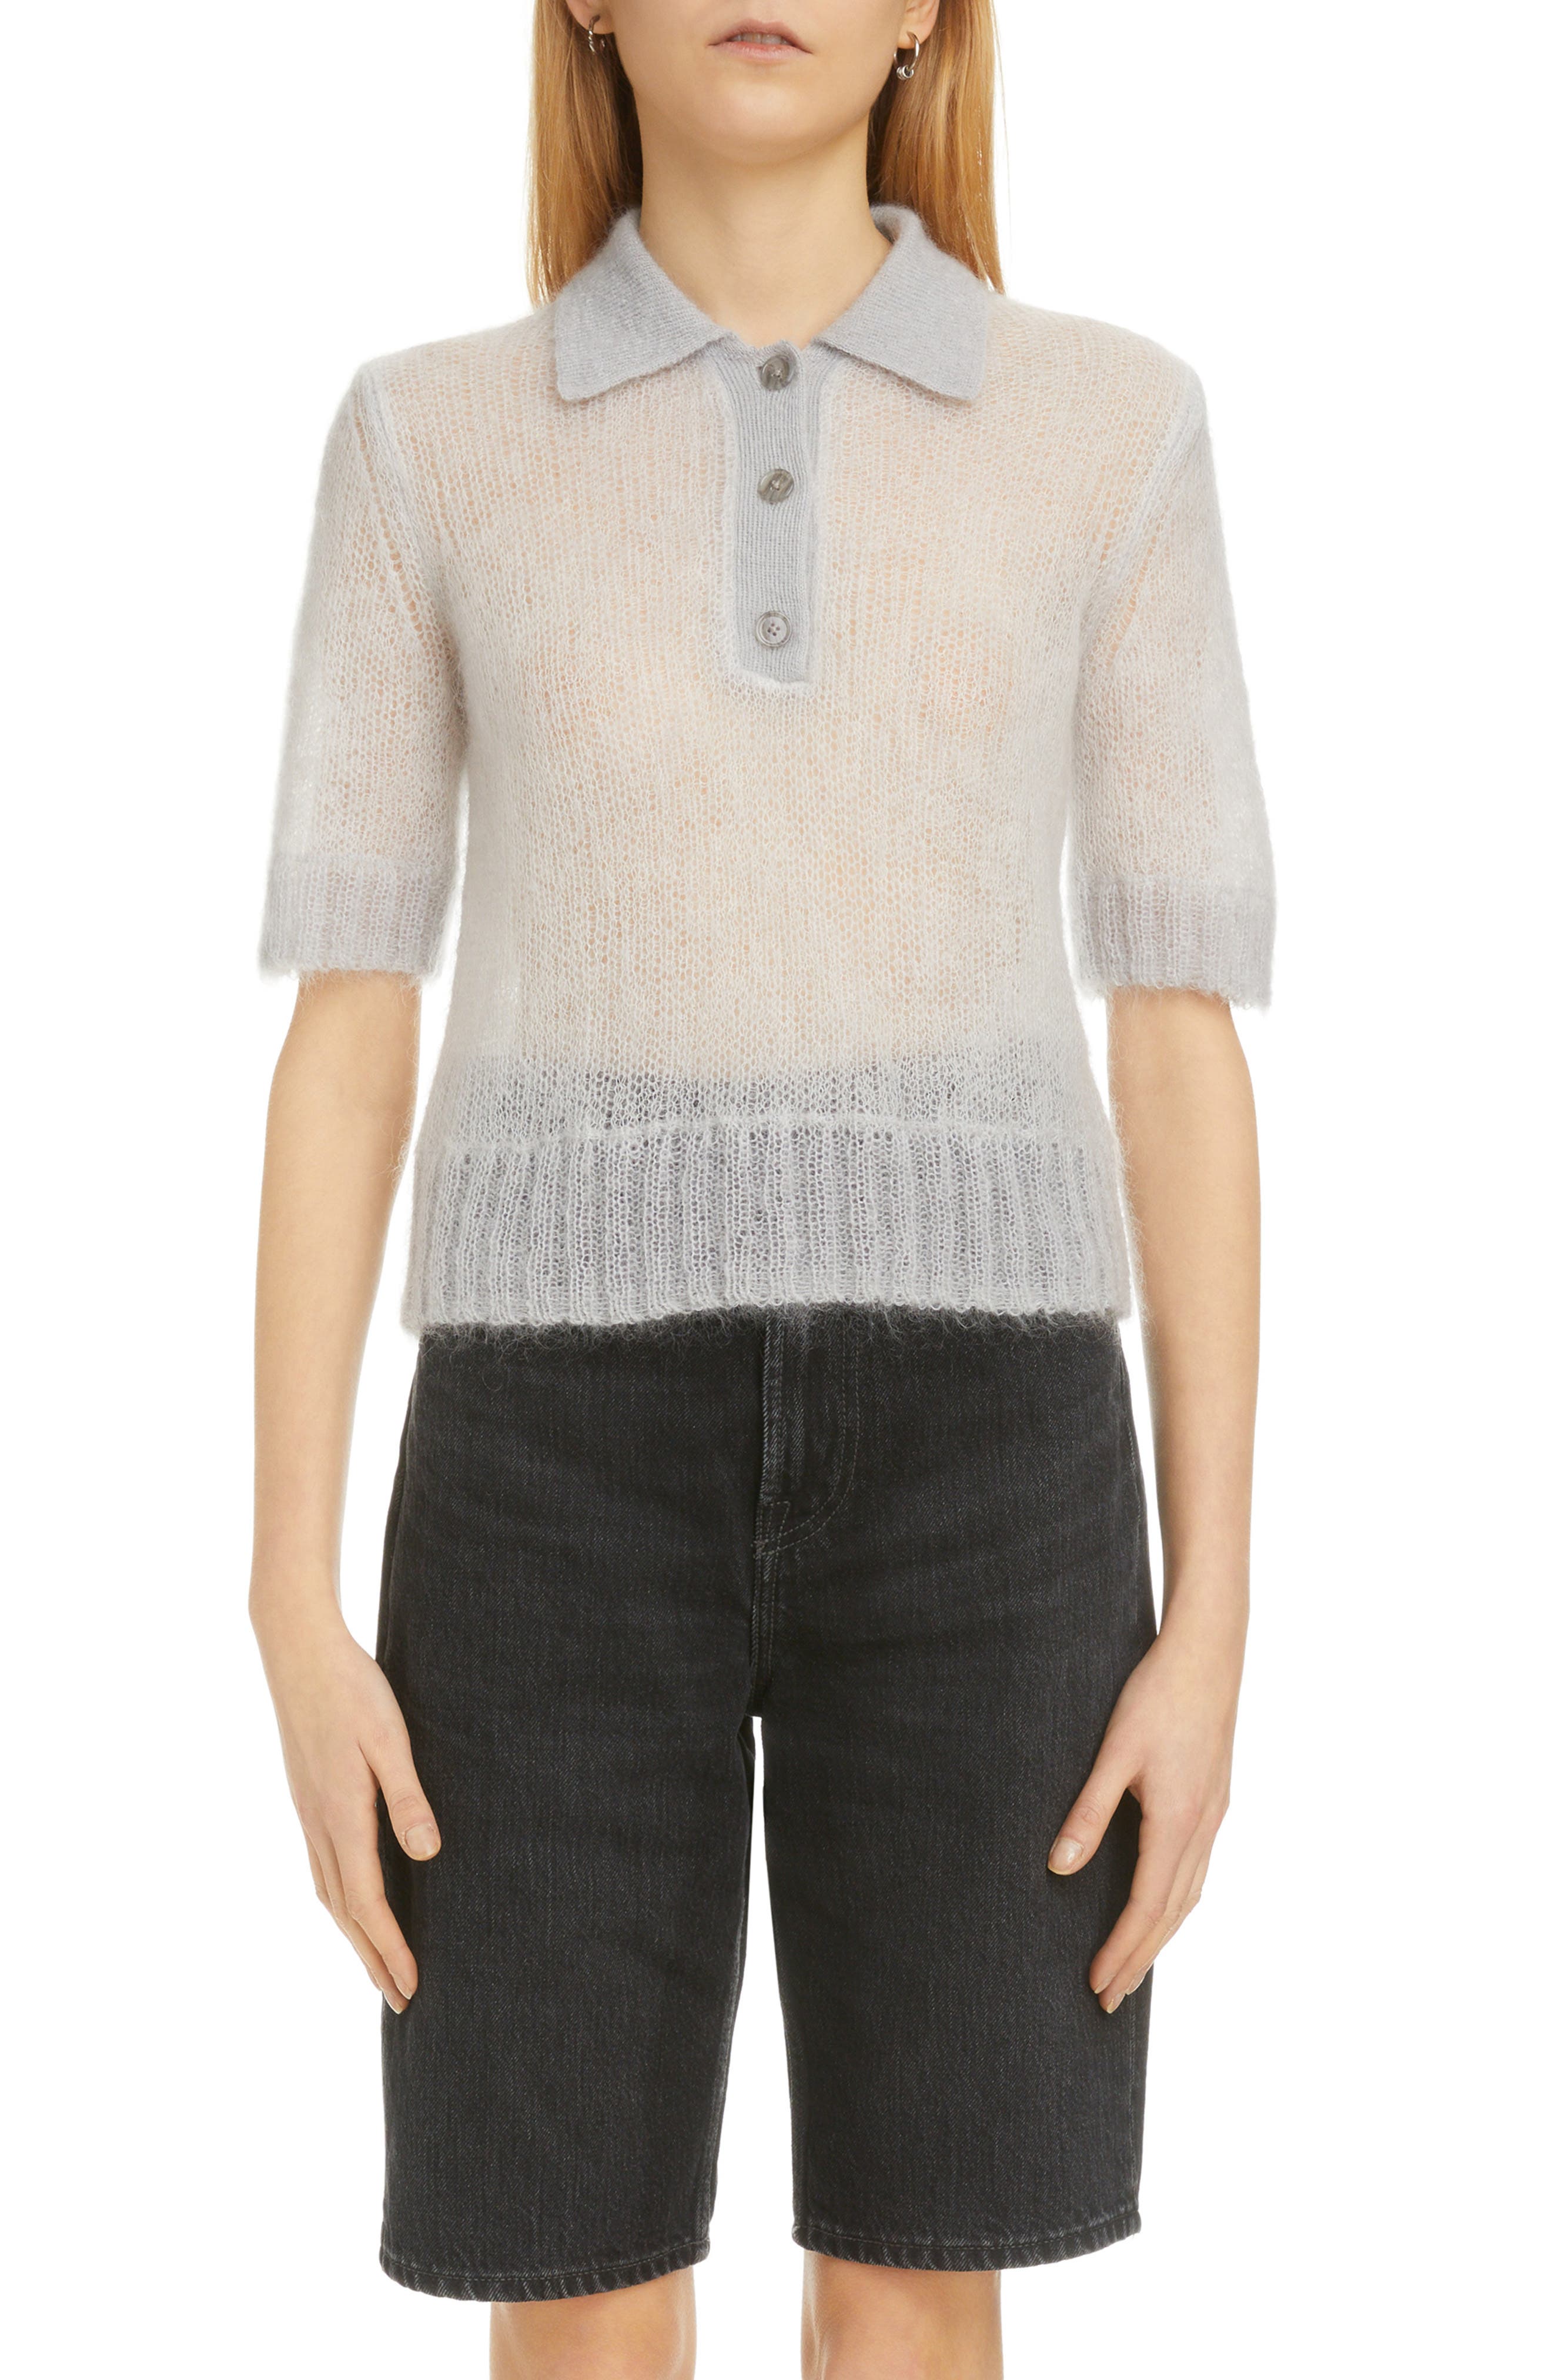 Acne Studios Kleah Double Mohair Blend Polo Sweater in Pale Grey at Nordstrom, Size X-Small